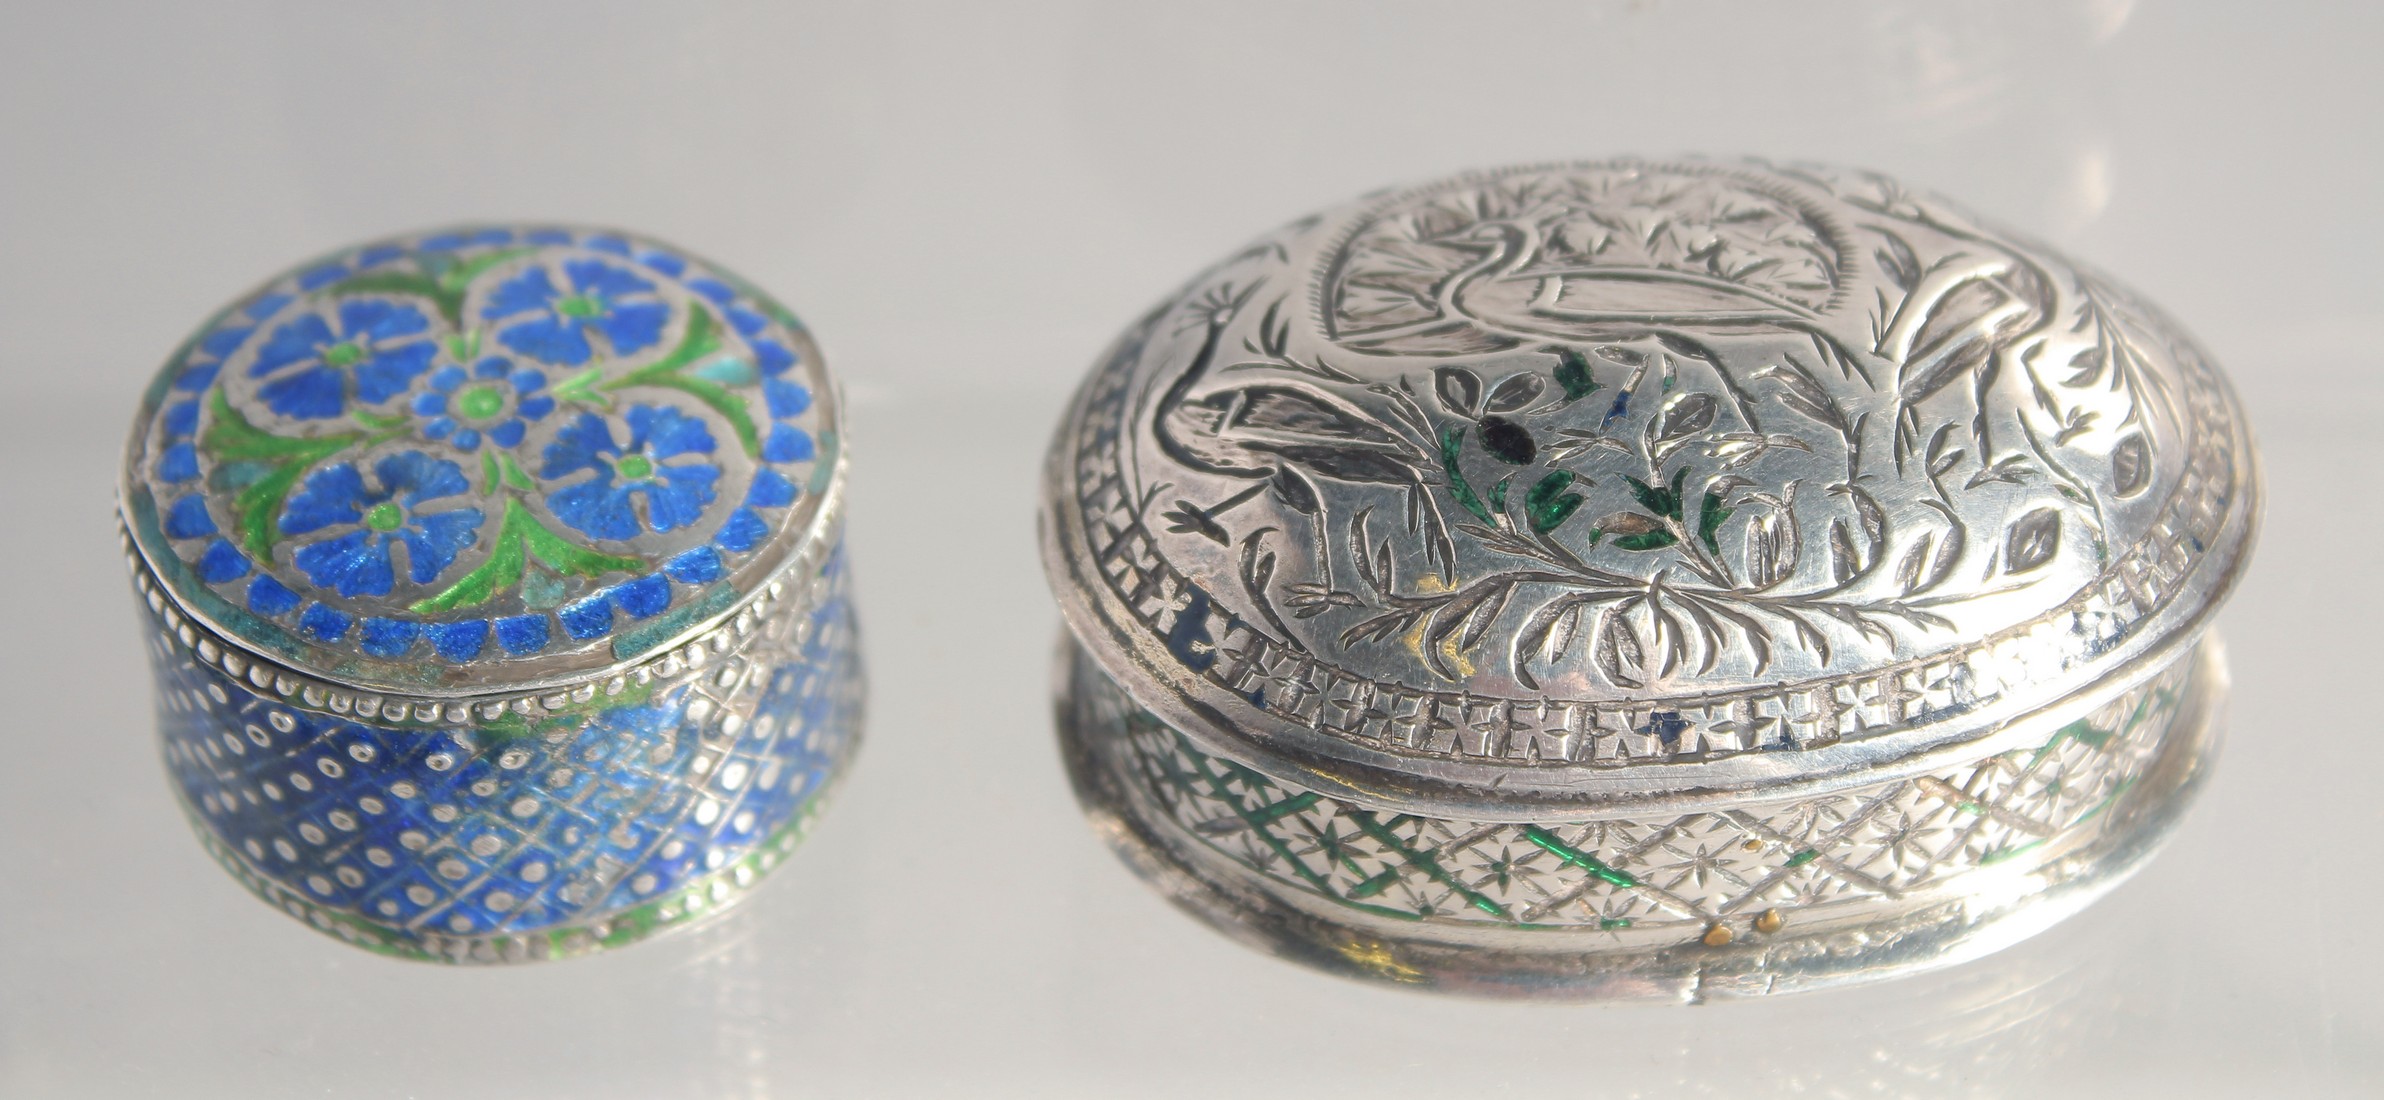 TWO 18TH/19TH CENTURY MUGHAL INDIAN LUCKNOW ENAMELLED SILVER SNUFF BOXES, 6cm wide and 3.5cm, (2).